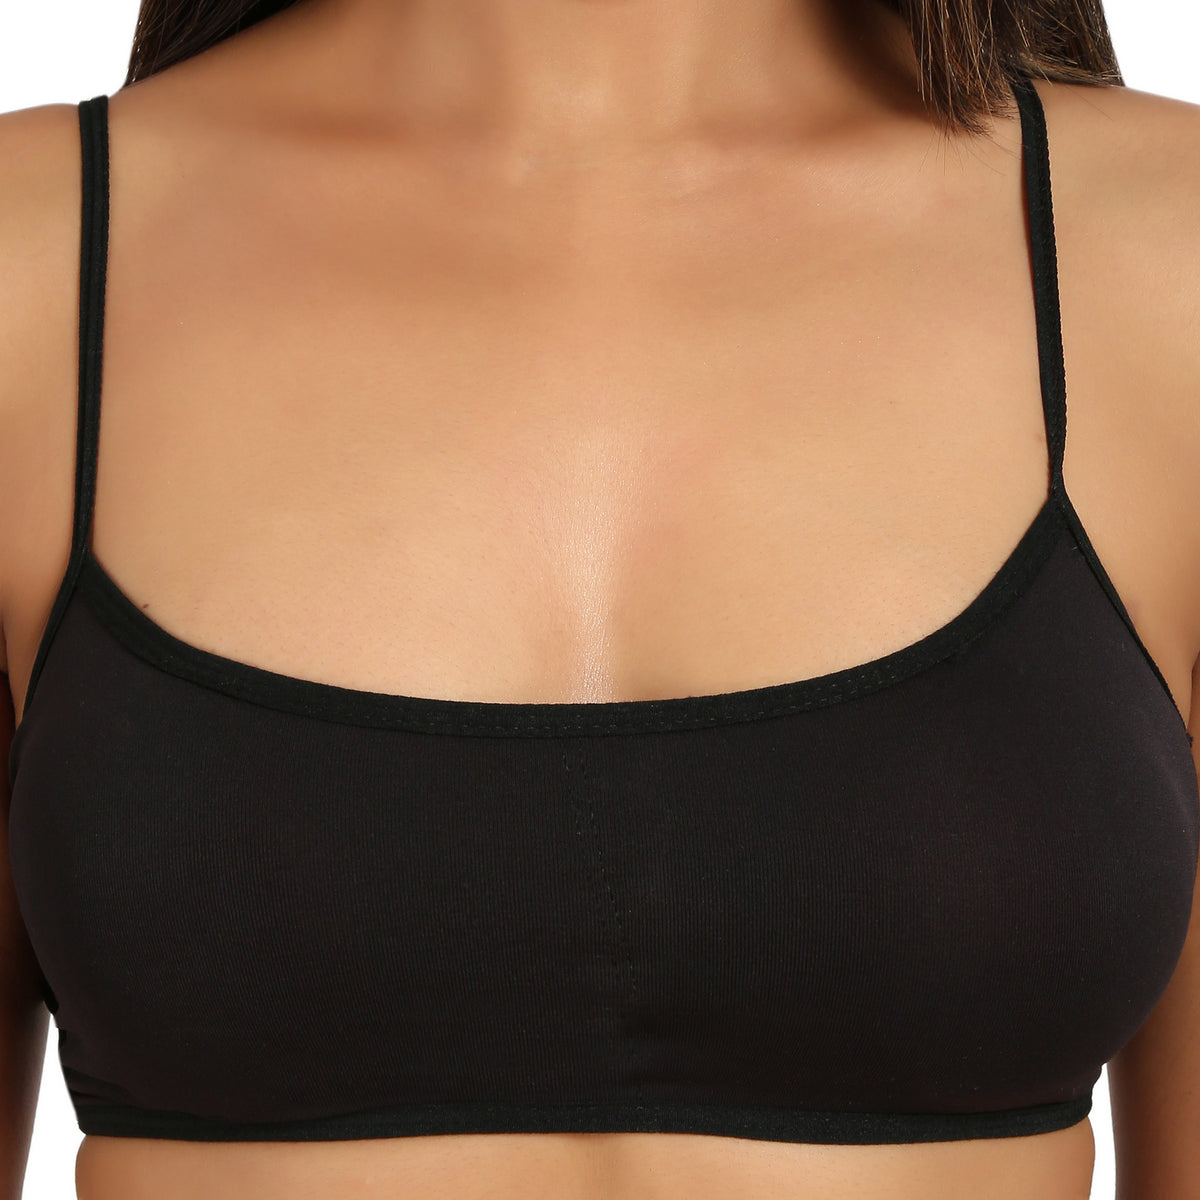 Bruchi club Women Lightly Padded sports Bra with 3/4th coverage-Black color